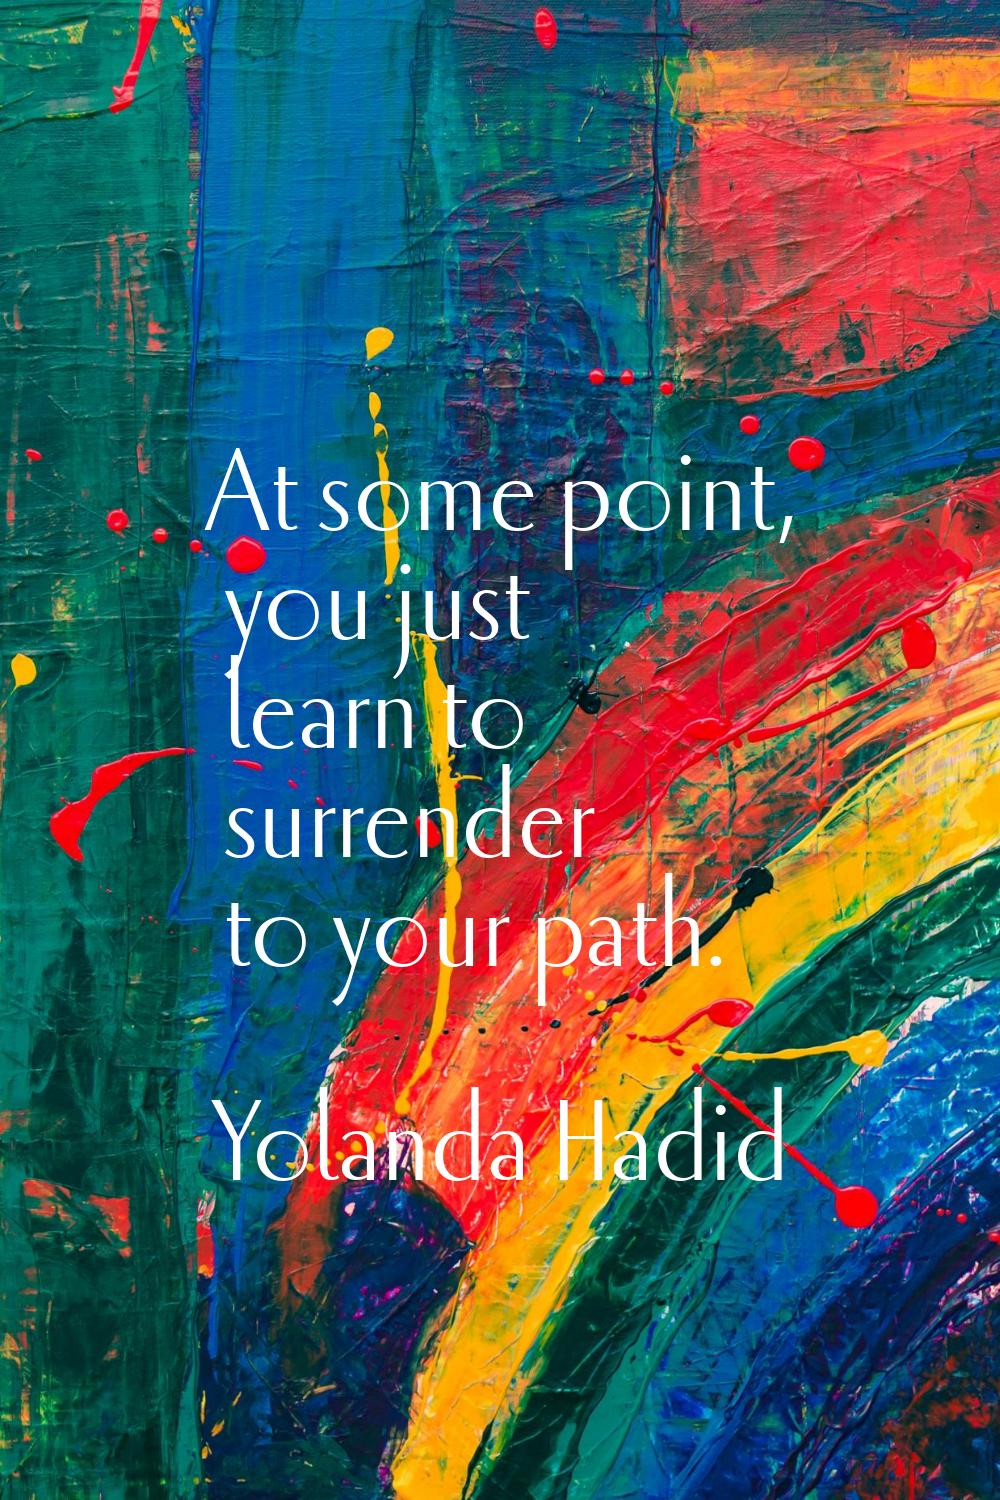 At some point, you just learn to surrender to your path.